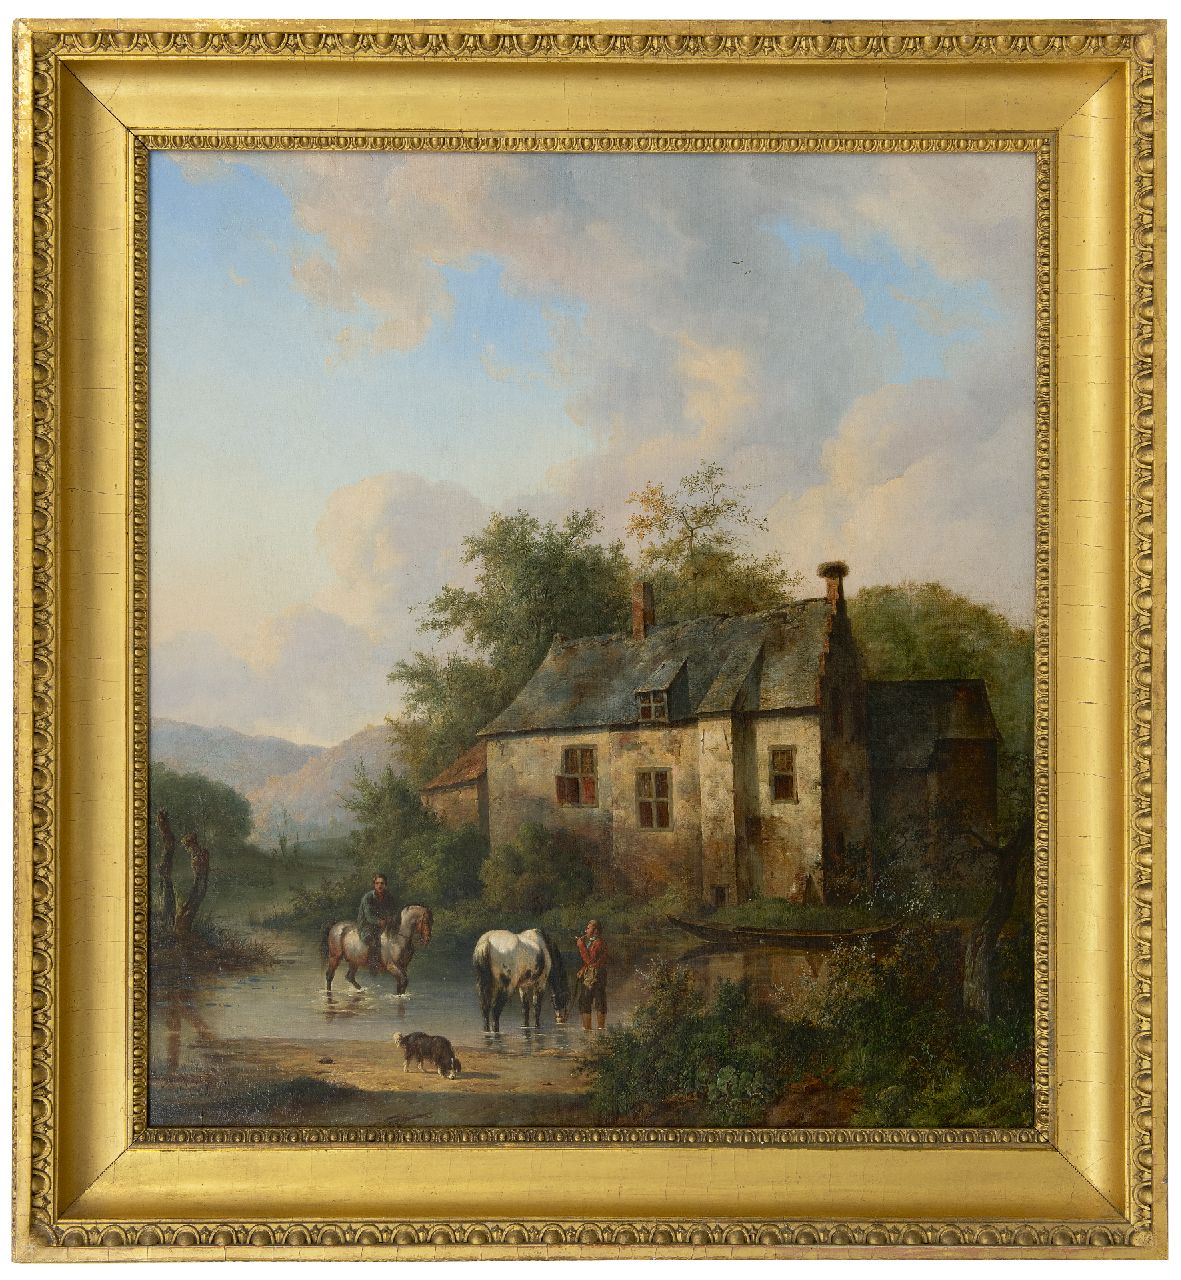 Verschuur W.  | Wouterus Verschuur | Paintings offered for sale | Equestrians and drinking horses near 'Huis te Boxtel', oil on canvas 70.5 x 63.7 cm, signed l.l